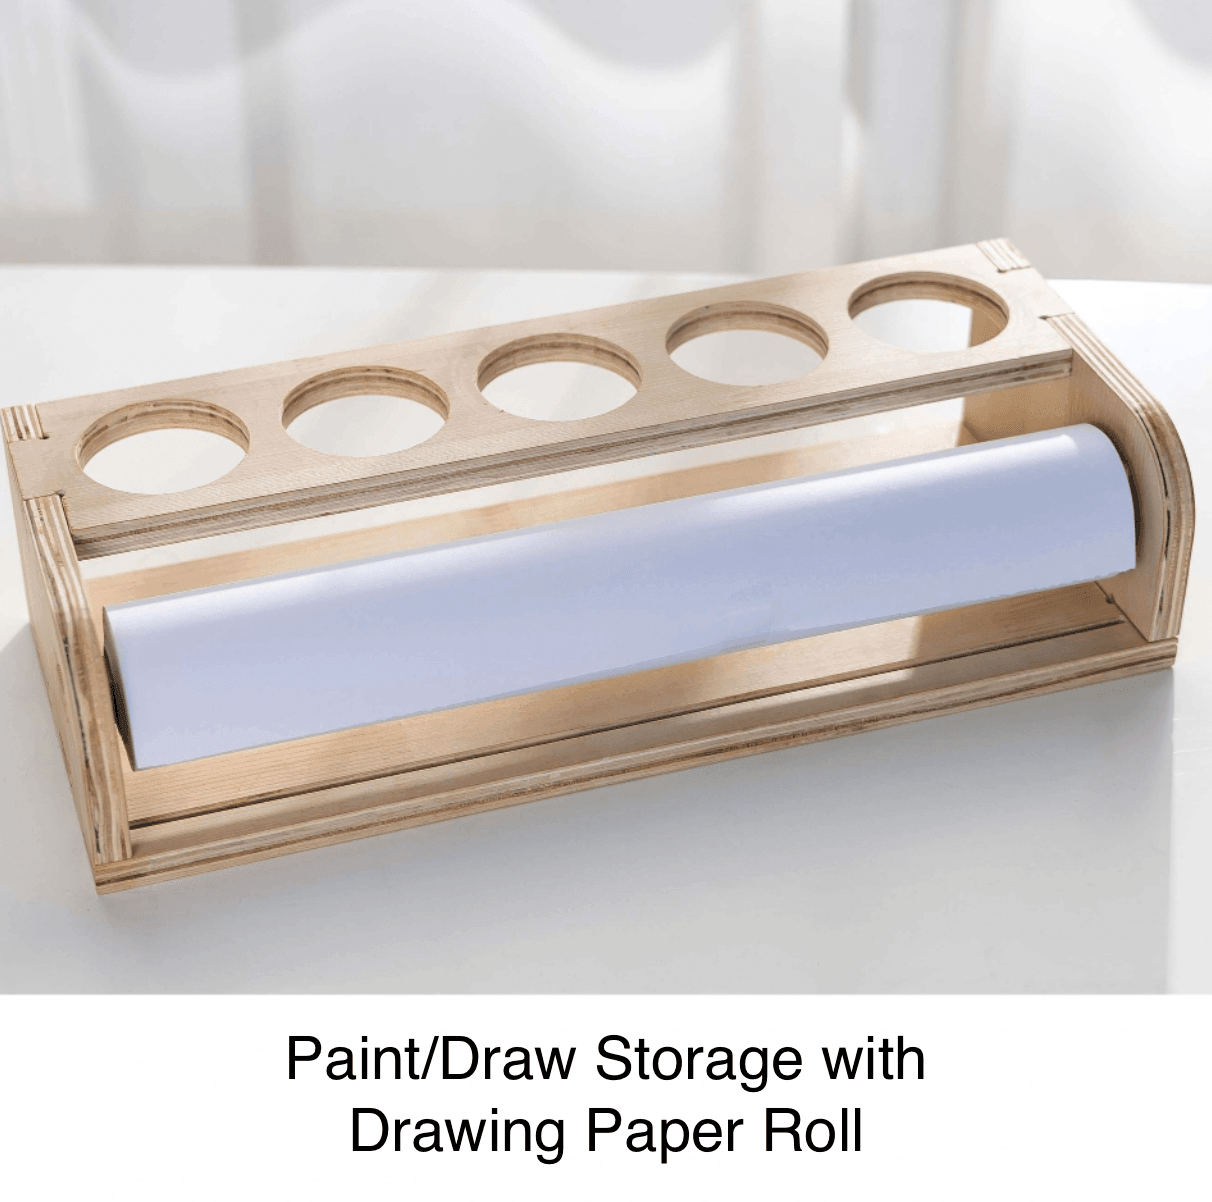 Kids Paint & Draw Storage Set with 10m Drawing Paper - Taylorson